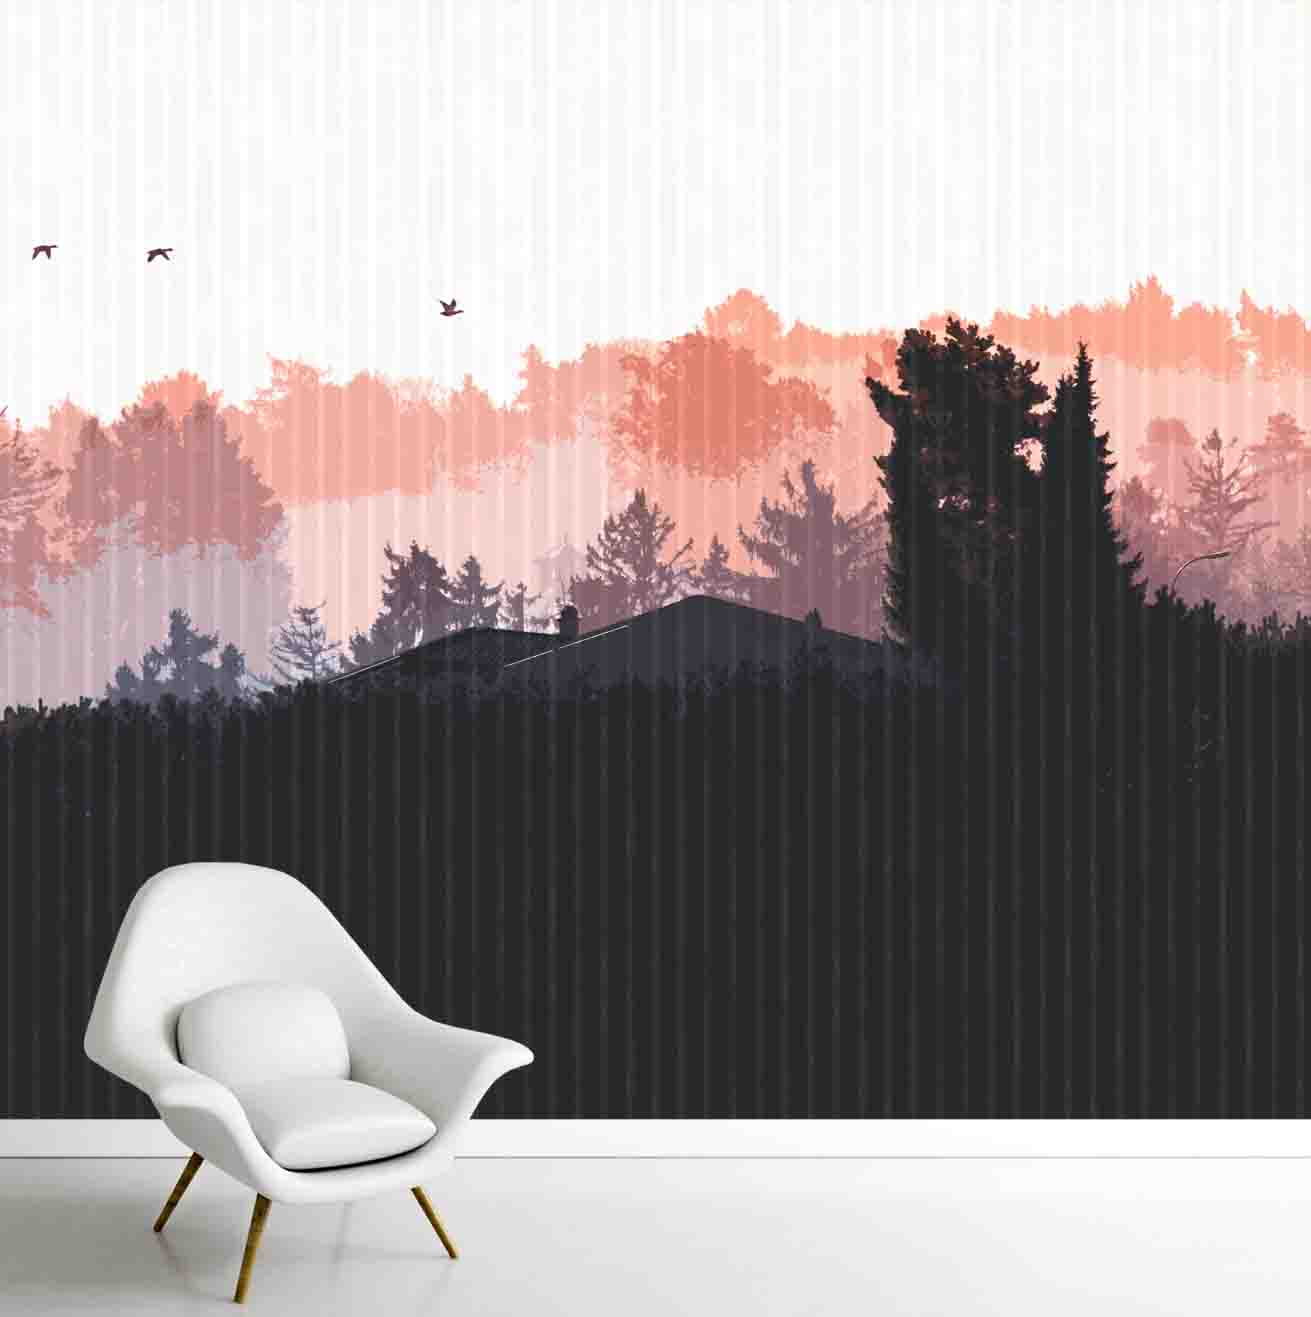 Silhouette Art Based Wall Mural, Customised | lifencolors – Life n Colors